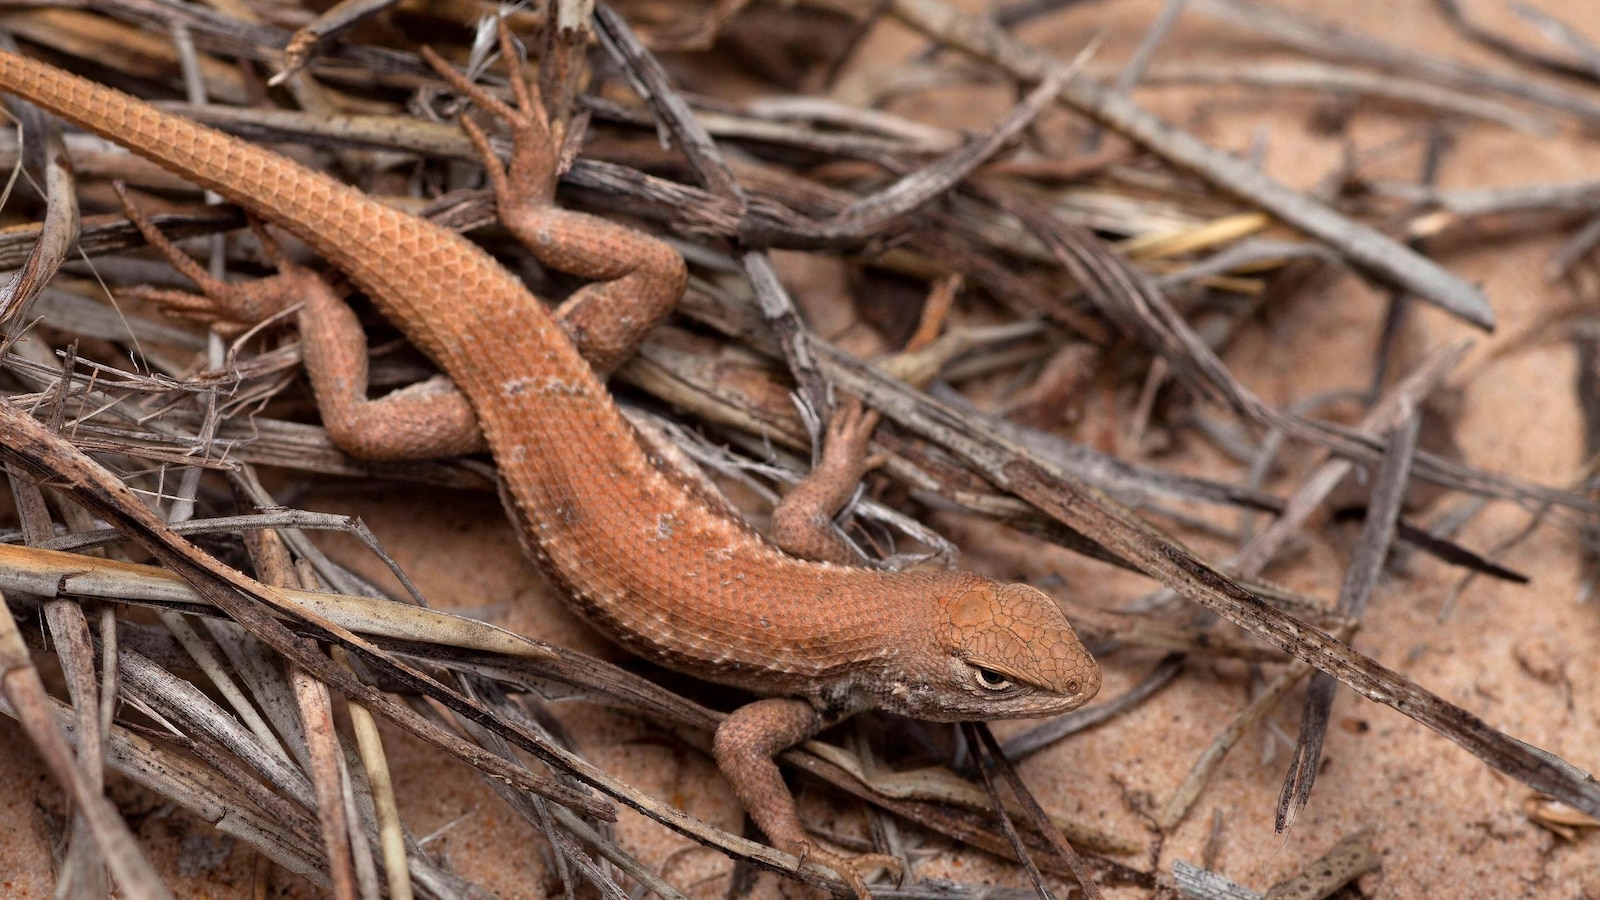 A new endangered list of rare lizards could slow oil and gas drilling in New Mexico and West Texas